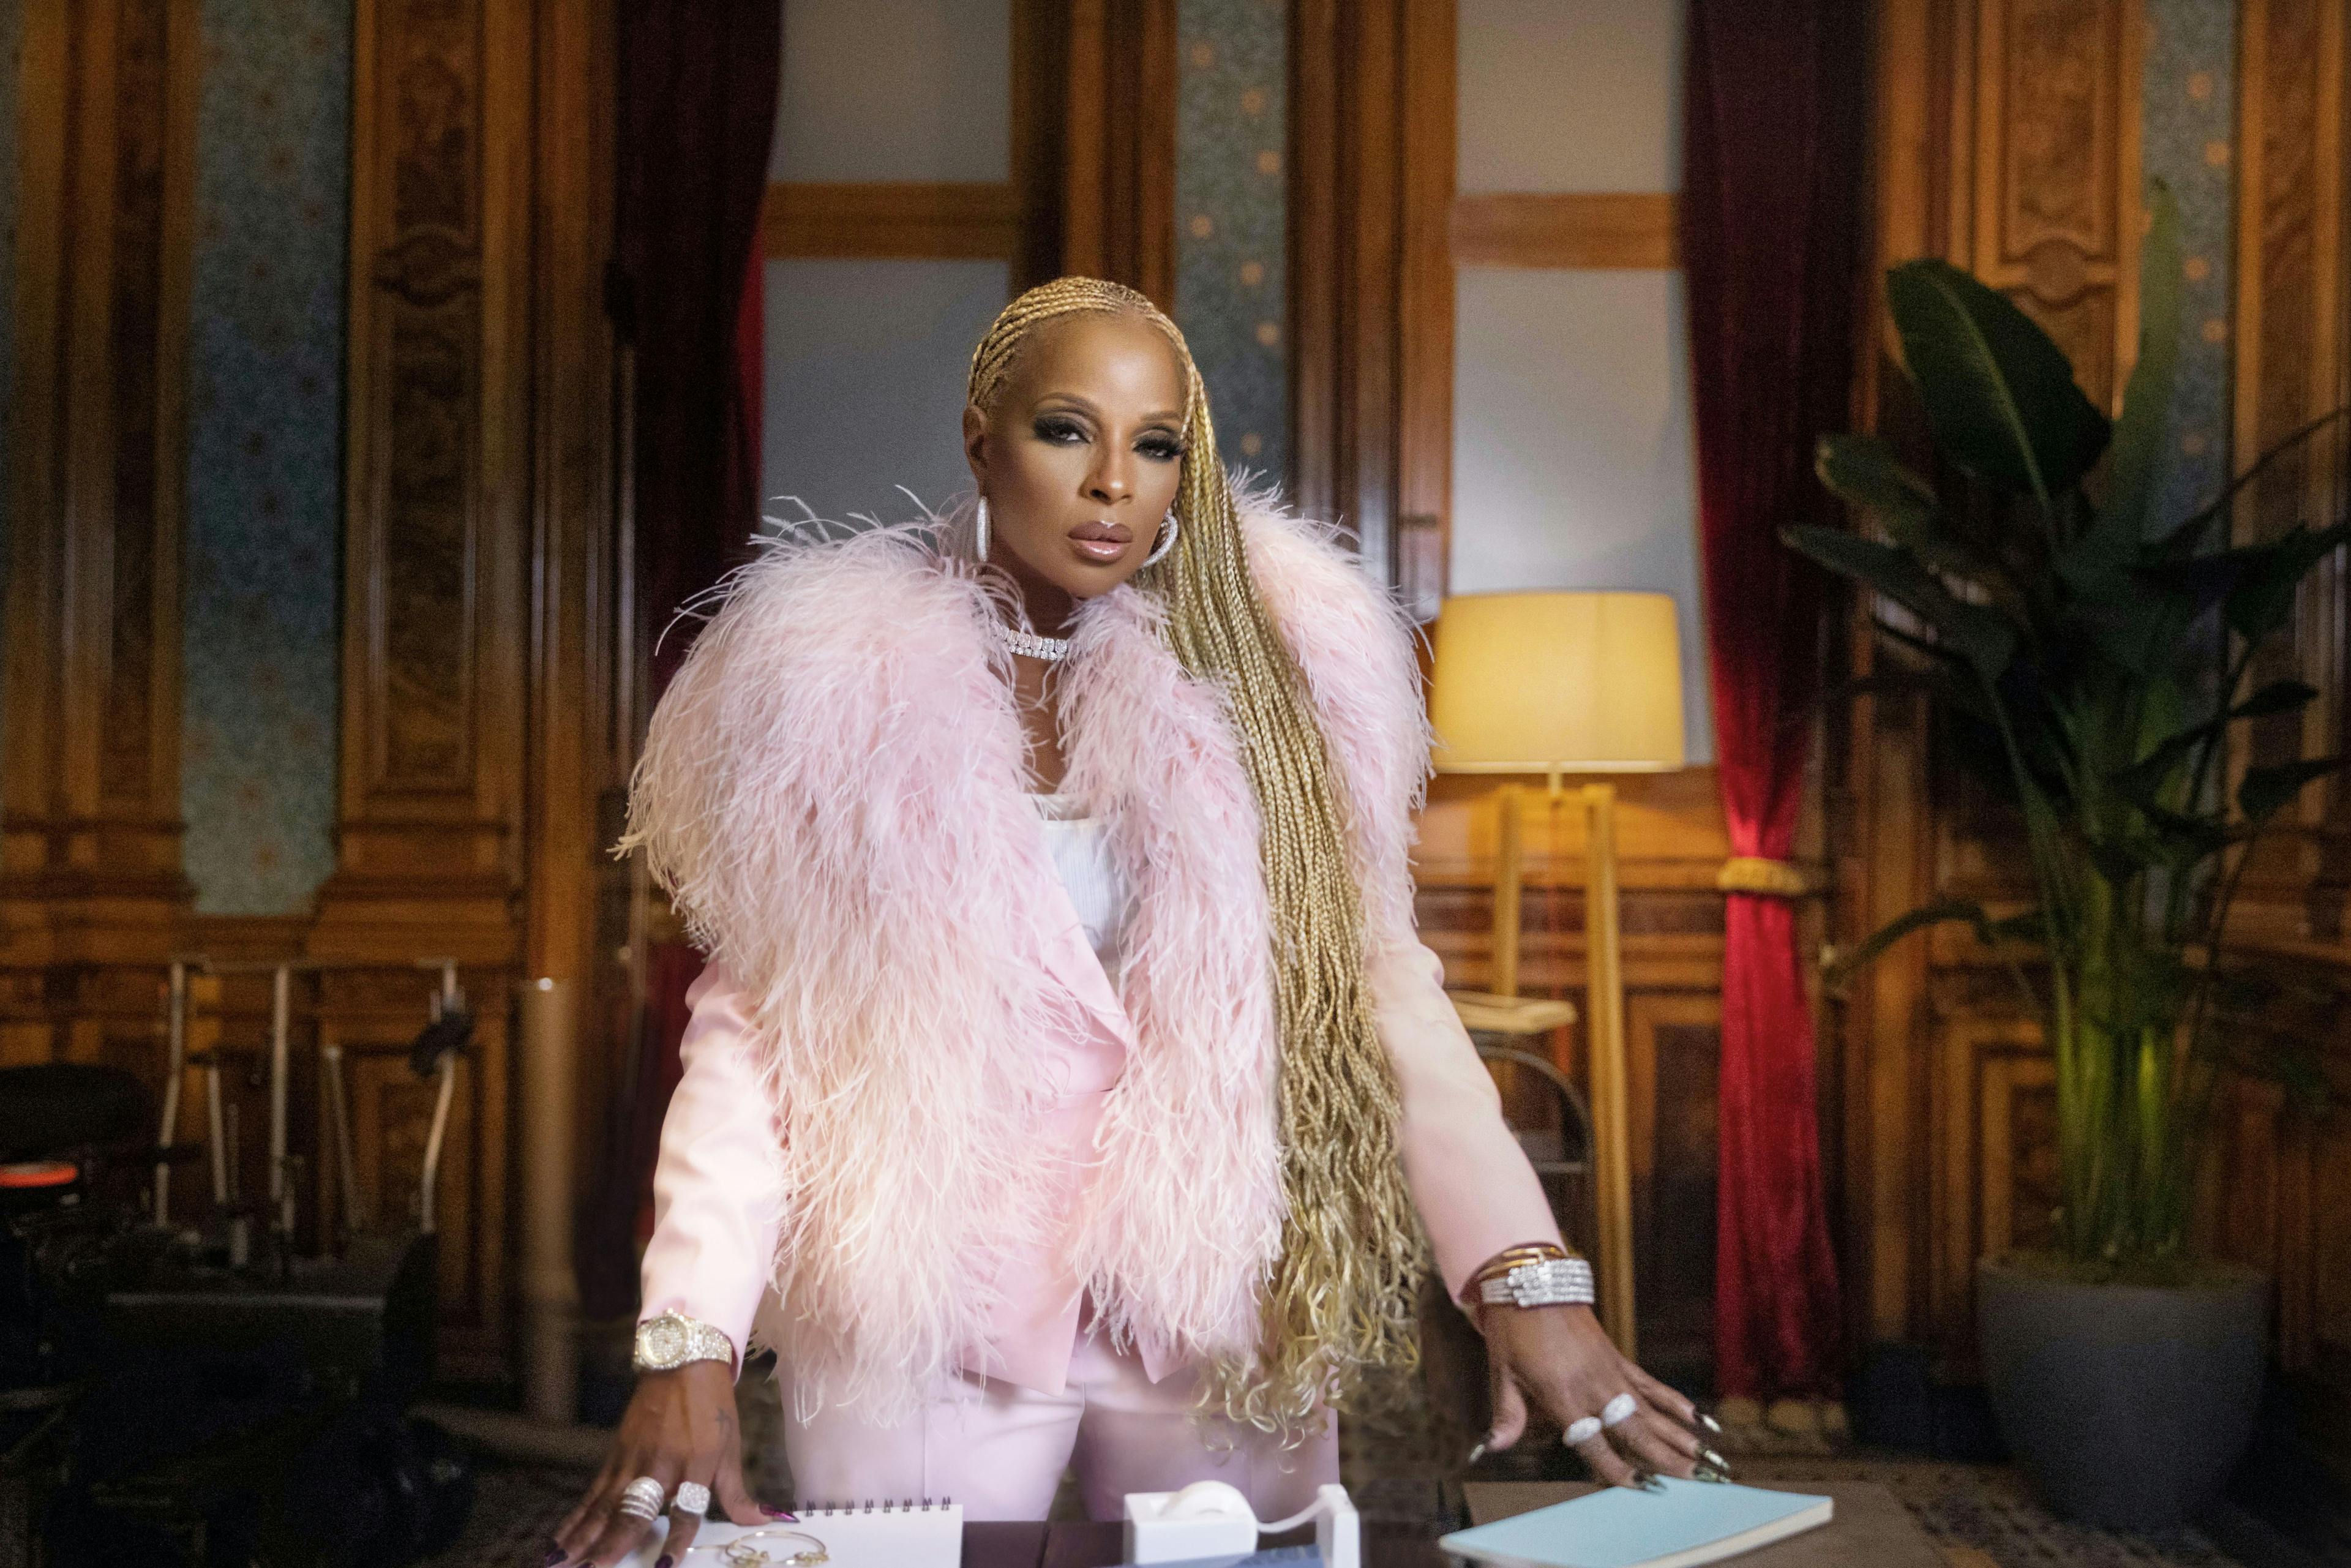 Hologic announces Super Bowl advertising campaign with Mary J. Blige